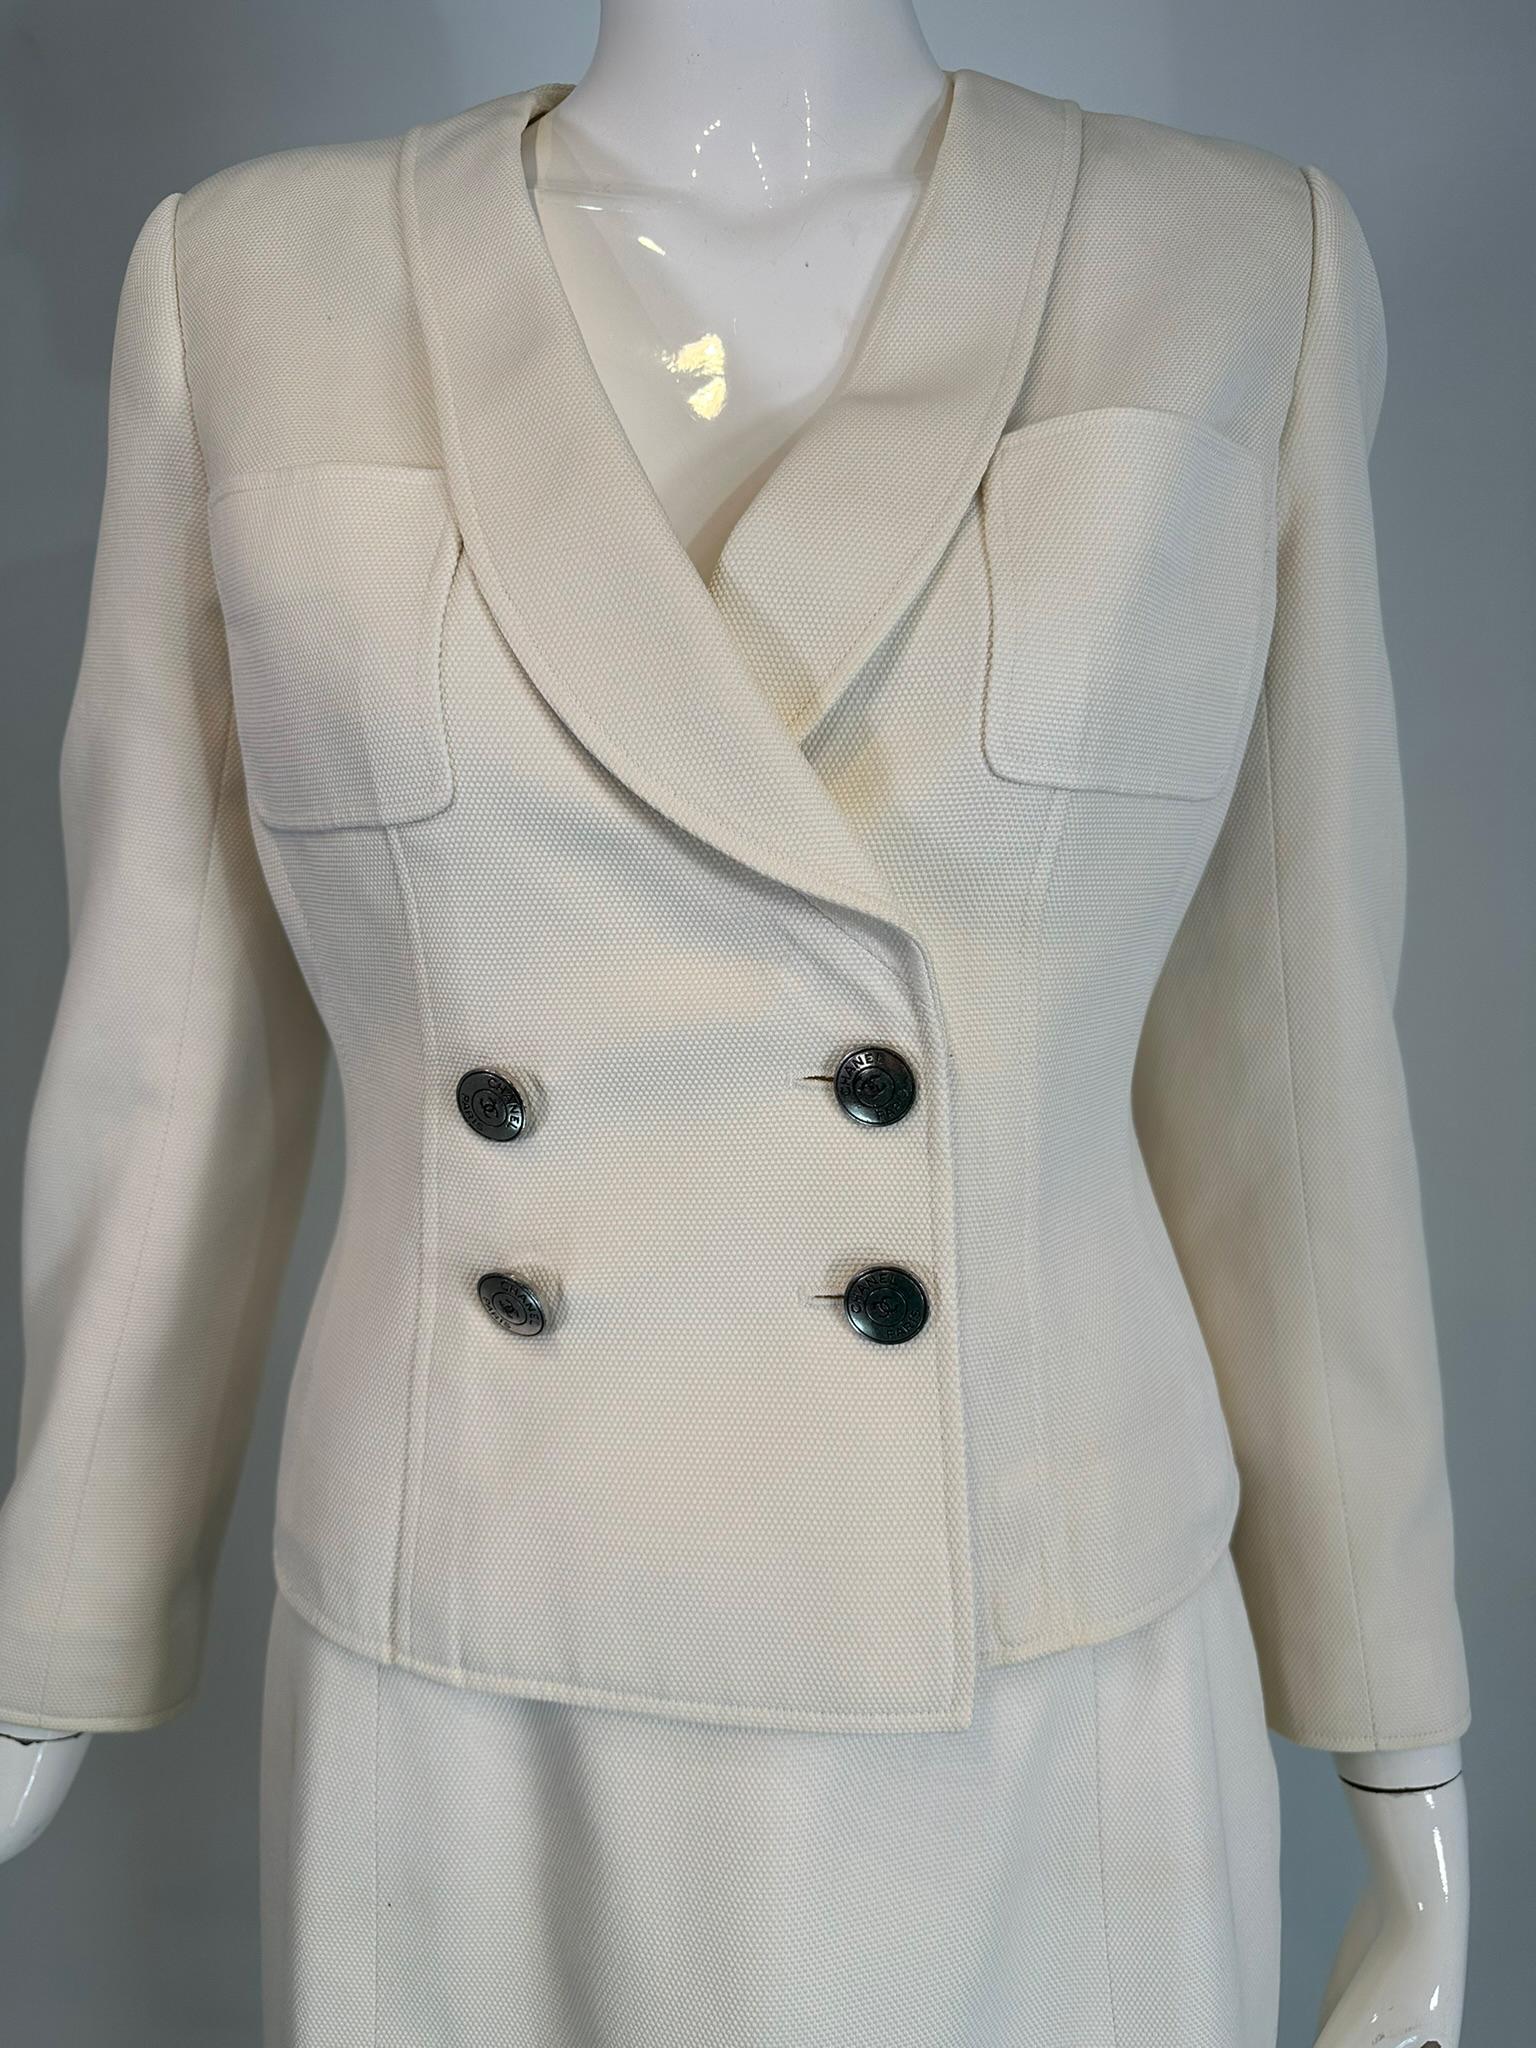 Chanel 1997 C Off White Cotton Pique Double Breasted Cropped Jacket & Skirt 40 For Sale 9